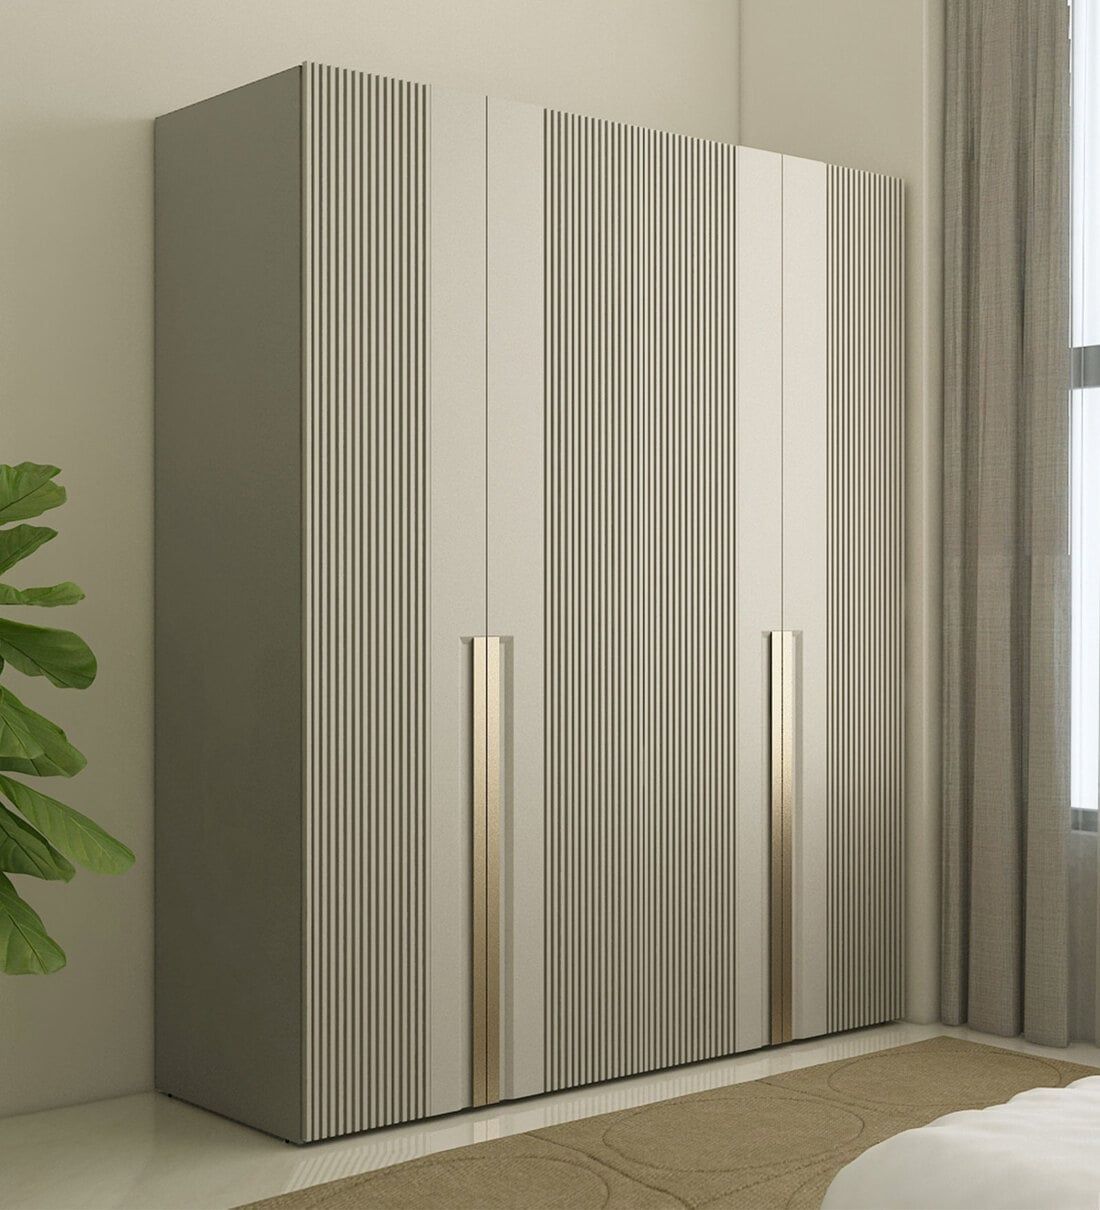 Buy Astor Modern 4 Door Wardrobe In Cashmere Colour With Stripes At 26% Off Spacewood | Pepperfry Regarding Wardrobes With 4 Doors (Photo 12 of 15)